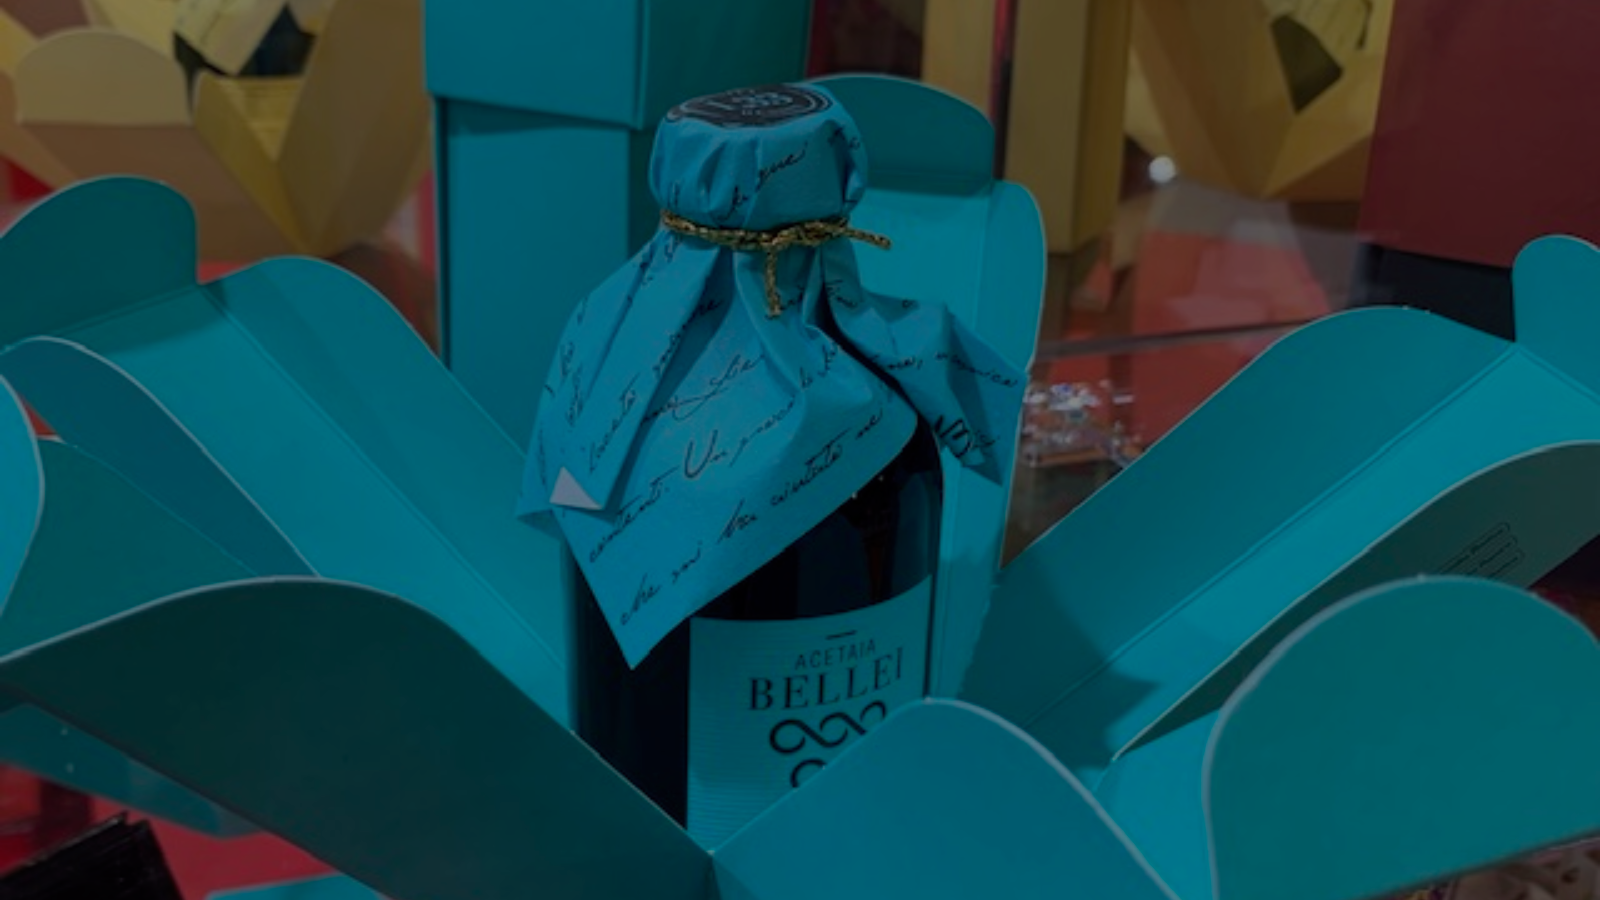 <p>Ideal for corporate gifts, Acetaia Bellei's Modena balsamic vinegar is available in paper gift boxes without glue dots, so they can be recycled</p>
